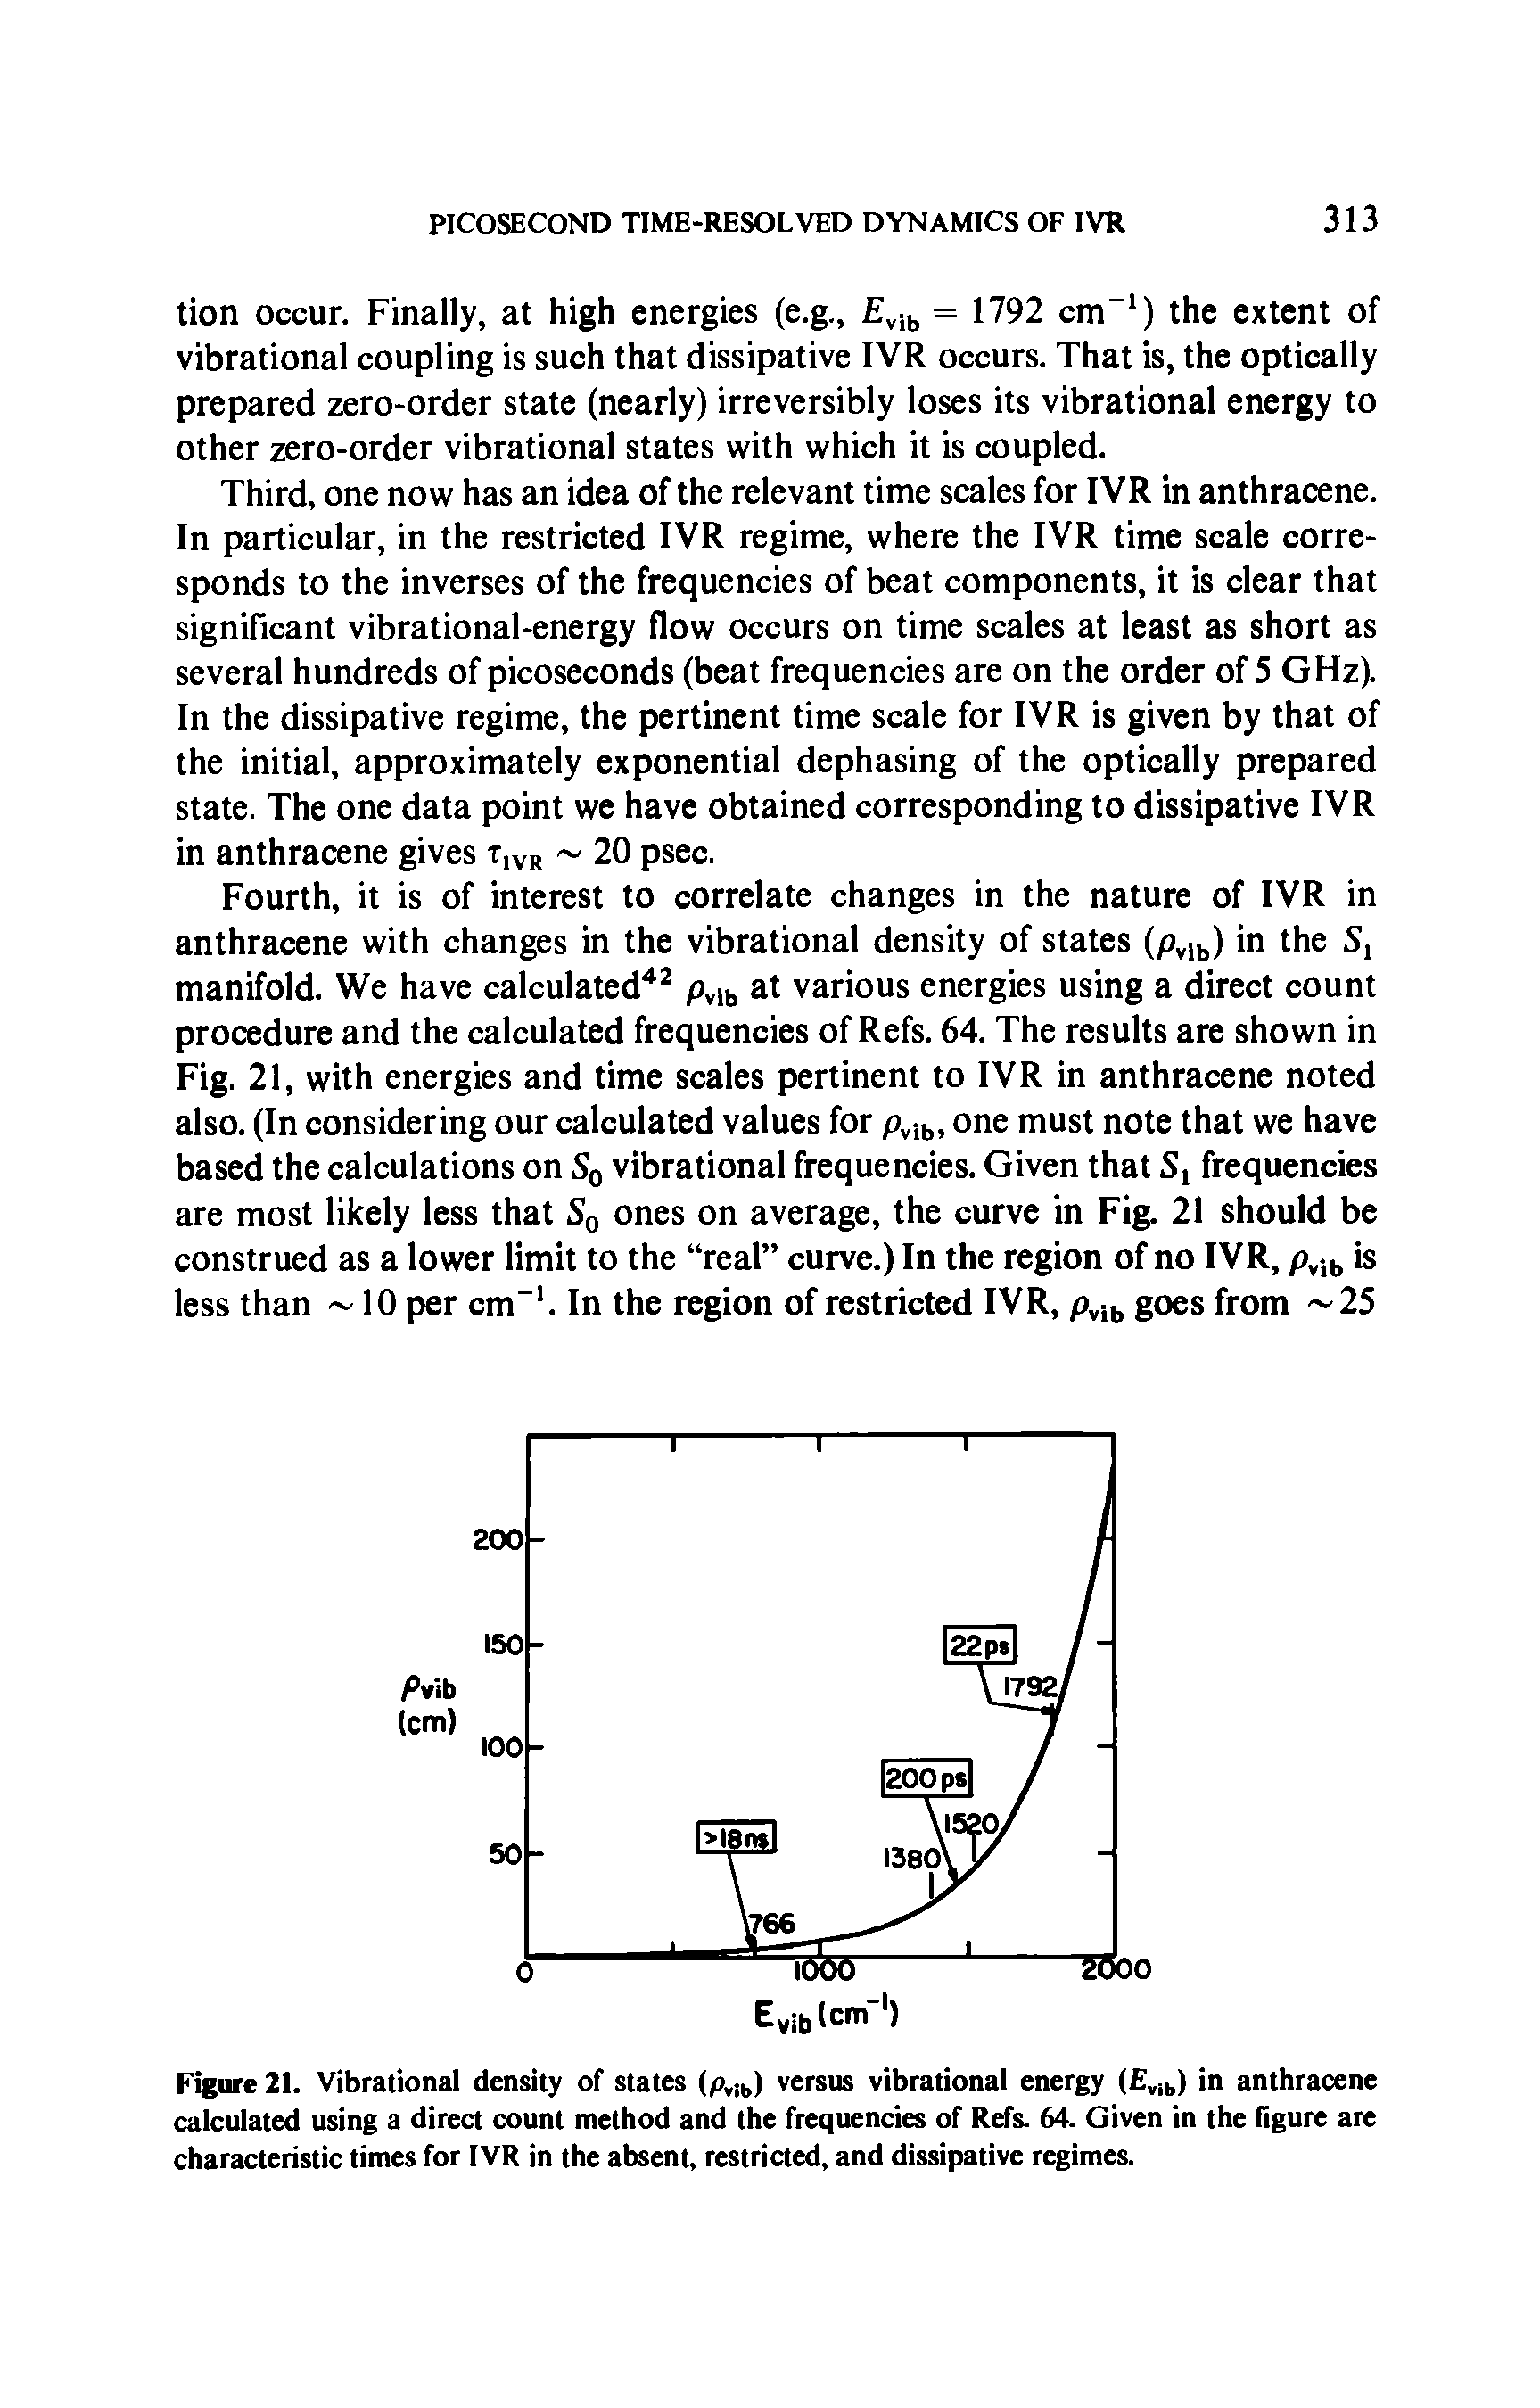 Figure 21. Vibrational density of states (pv b) versus vibrational energy (Evib) in anthracene calculated using a direct count method and the frequencies of Refs. 64. Given in the Figure are characteristic times for IVR in the absent, restricted, and dissipative regimes.